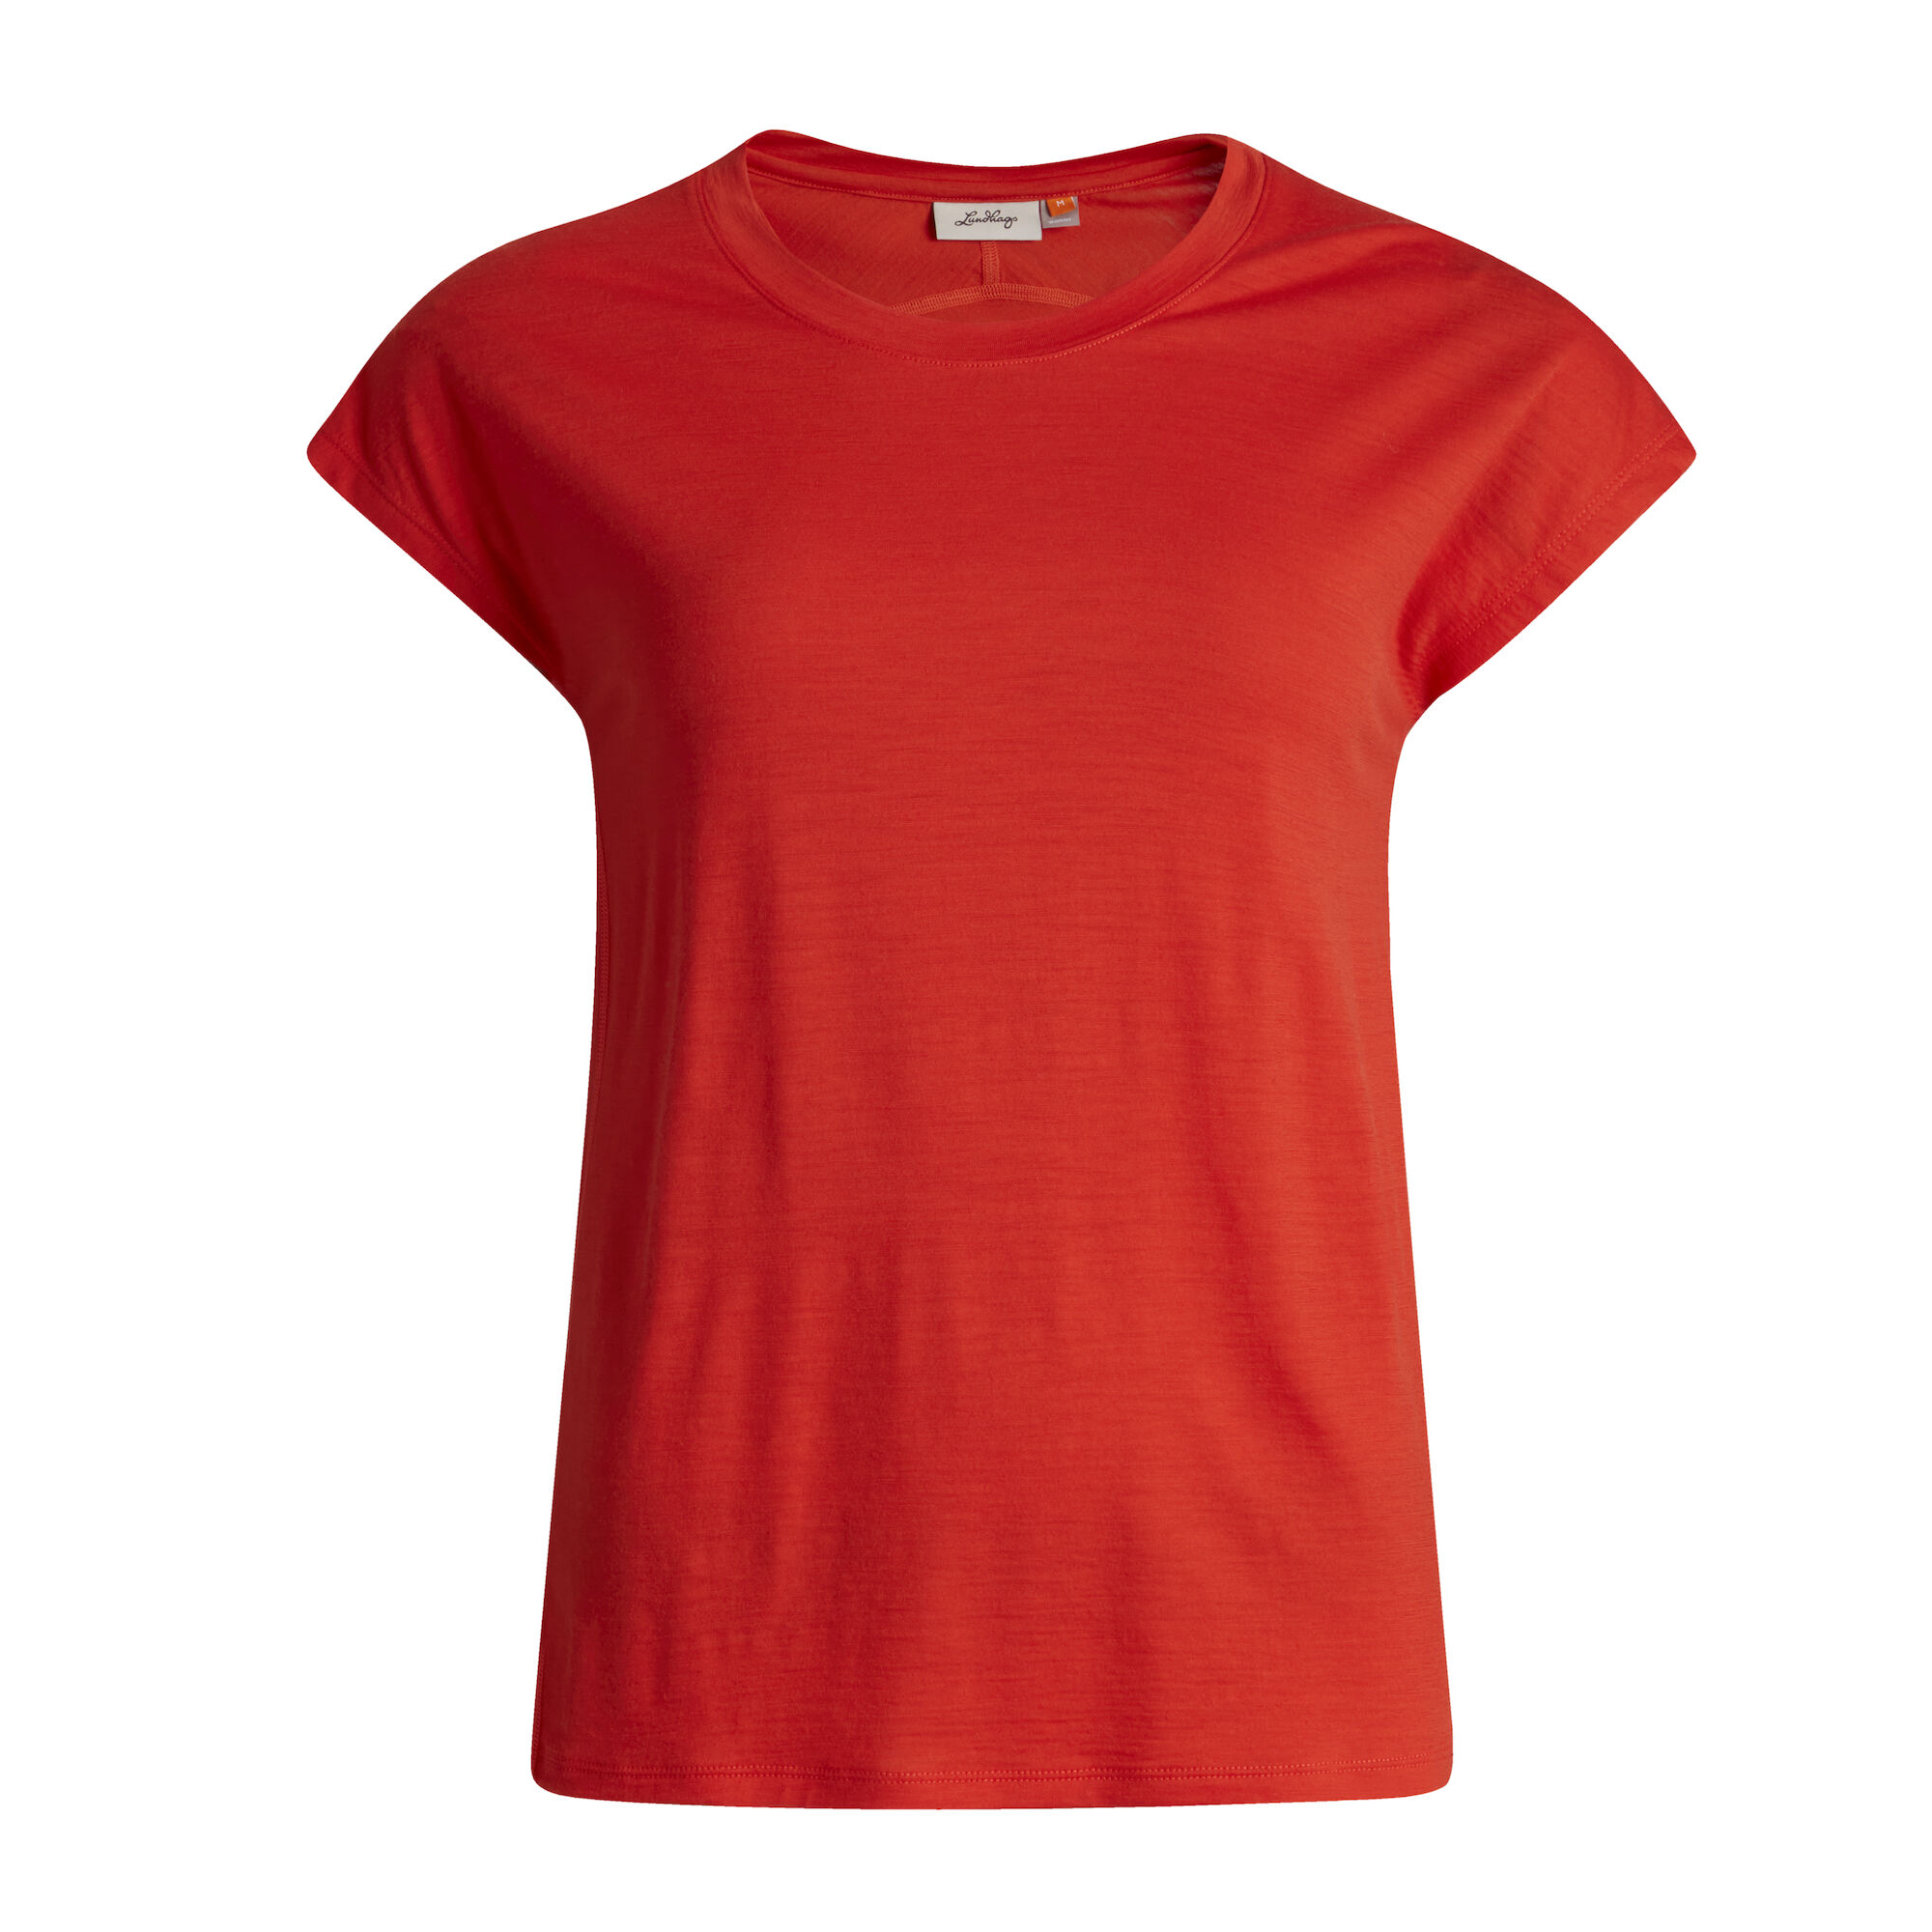 Lundhags Women's Gimmer Merino Light Top Lively Red M, Lively Red